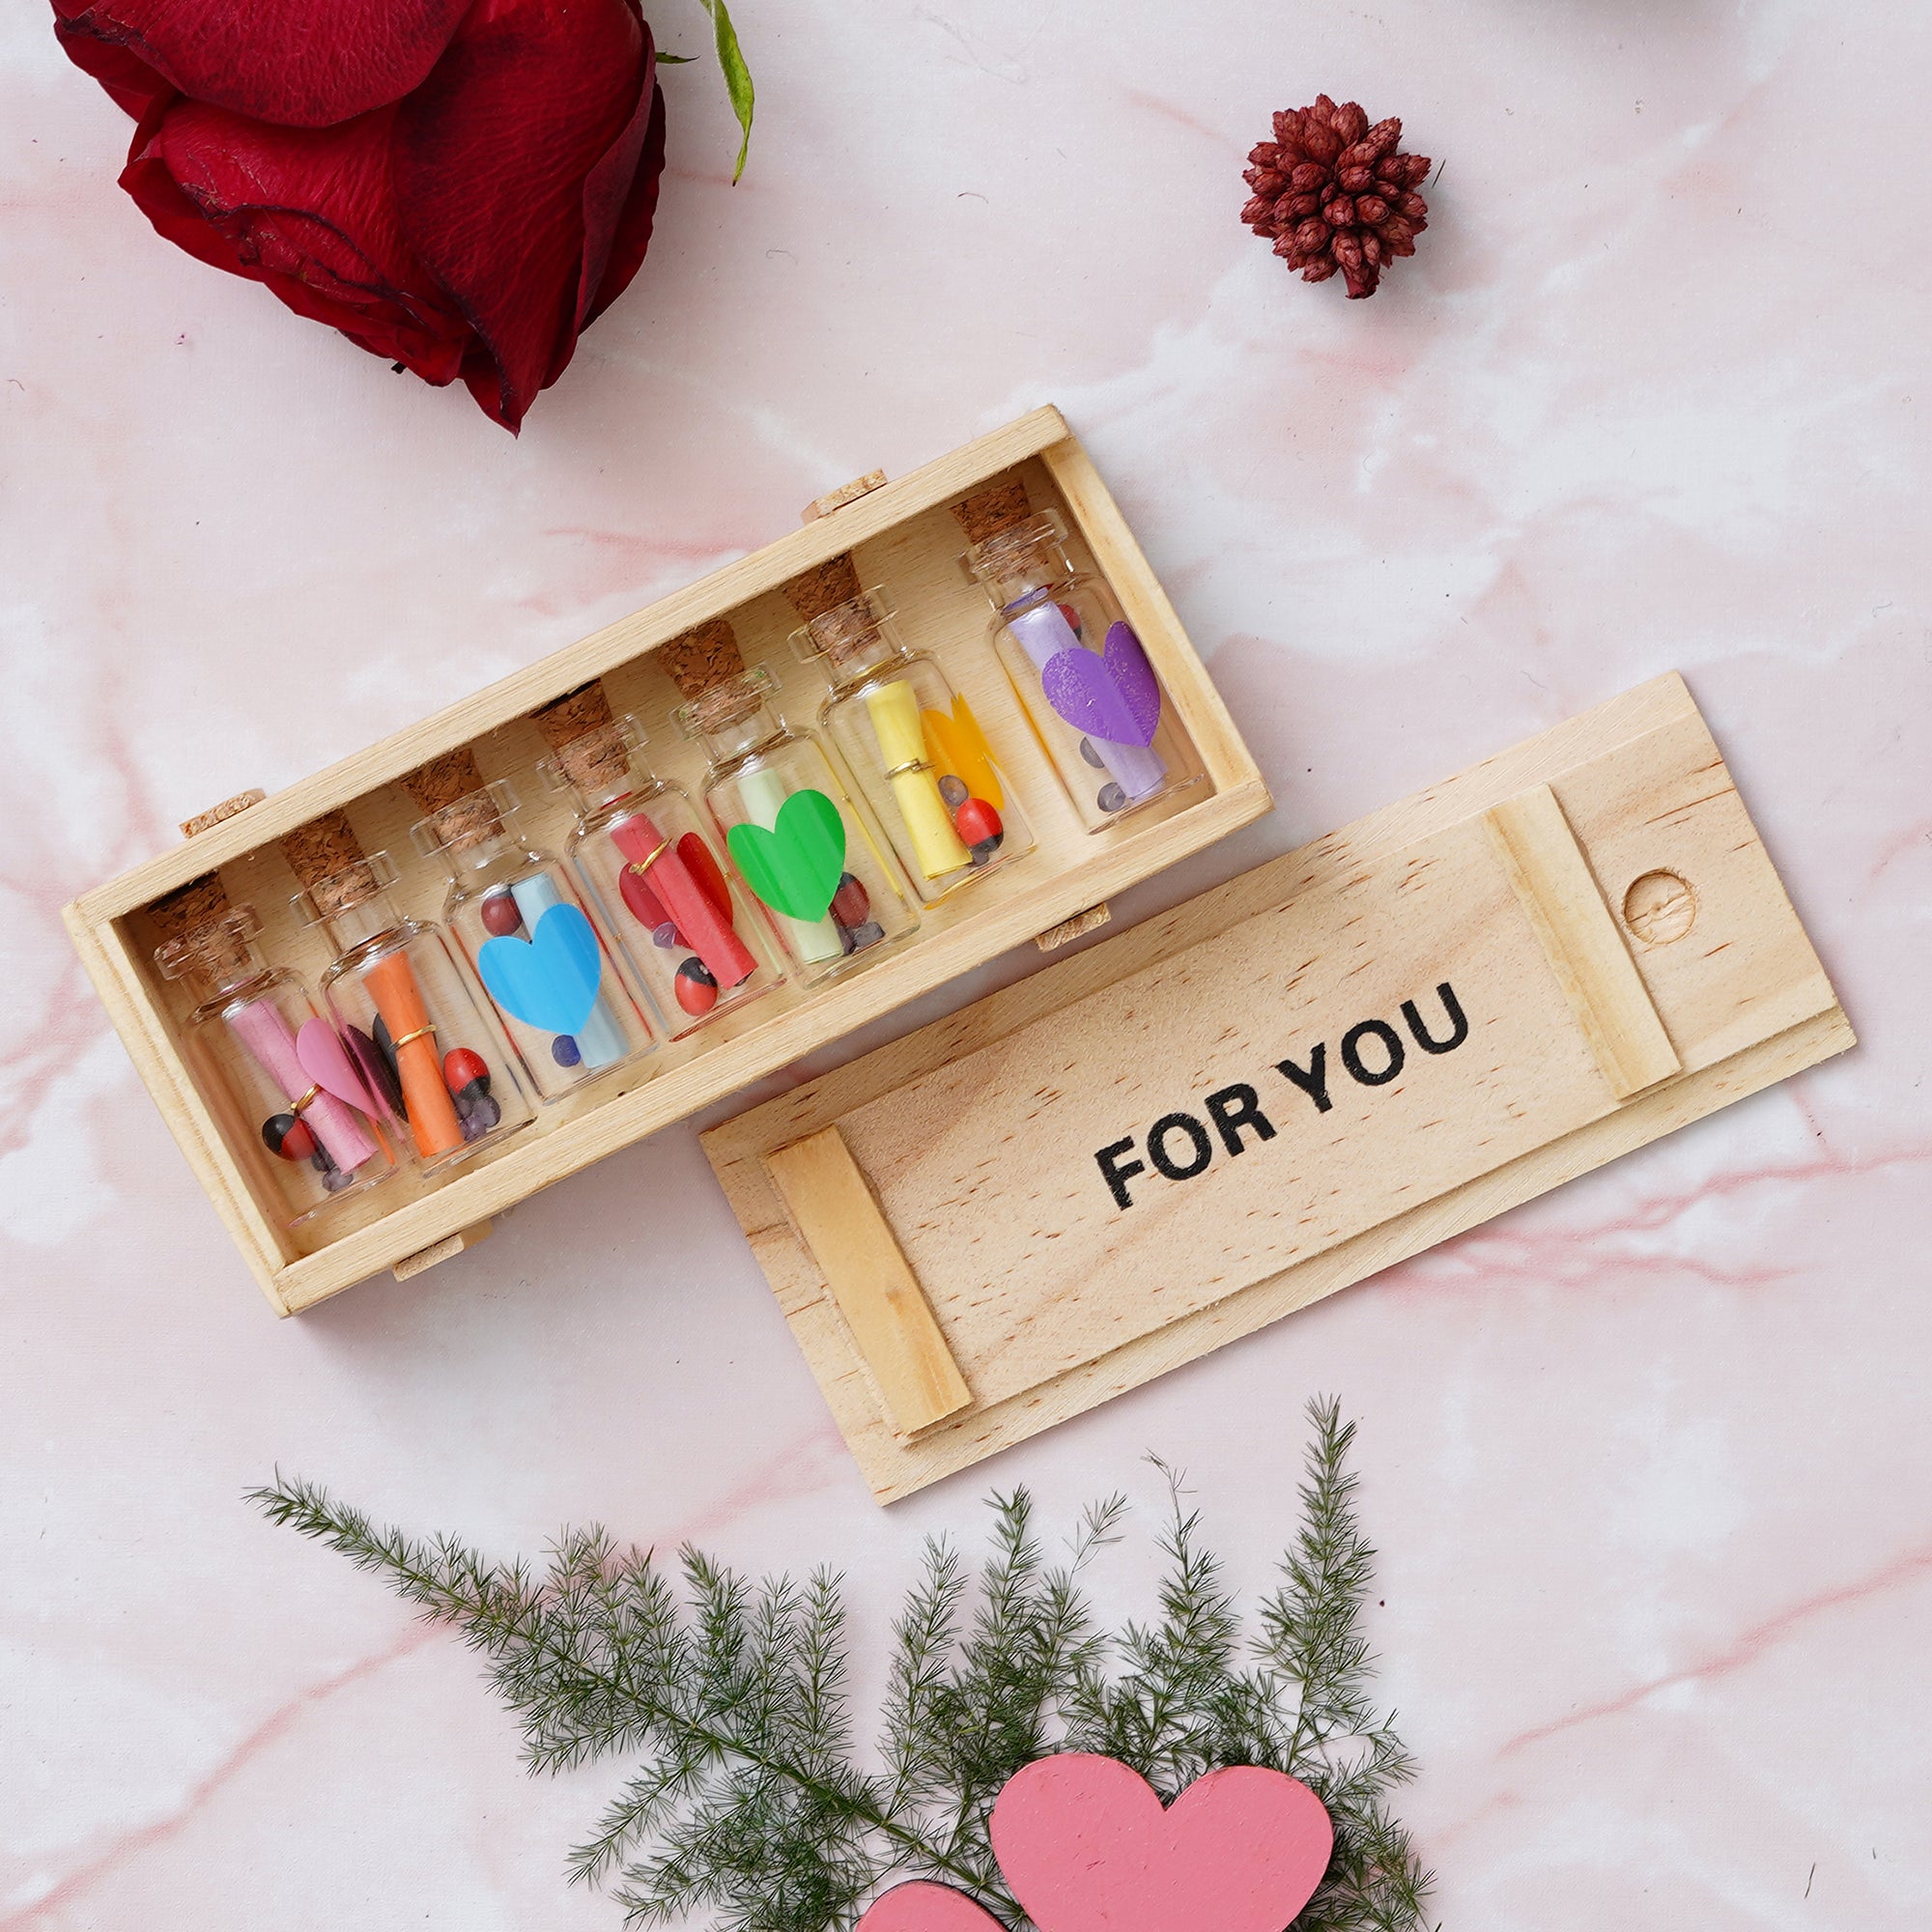 Valentine Combo of Pack of 8 Love Gift Cards, Red Gift Box with Teddy & Roses, Wooden Box "For You" Message Bottle Set 5